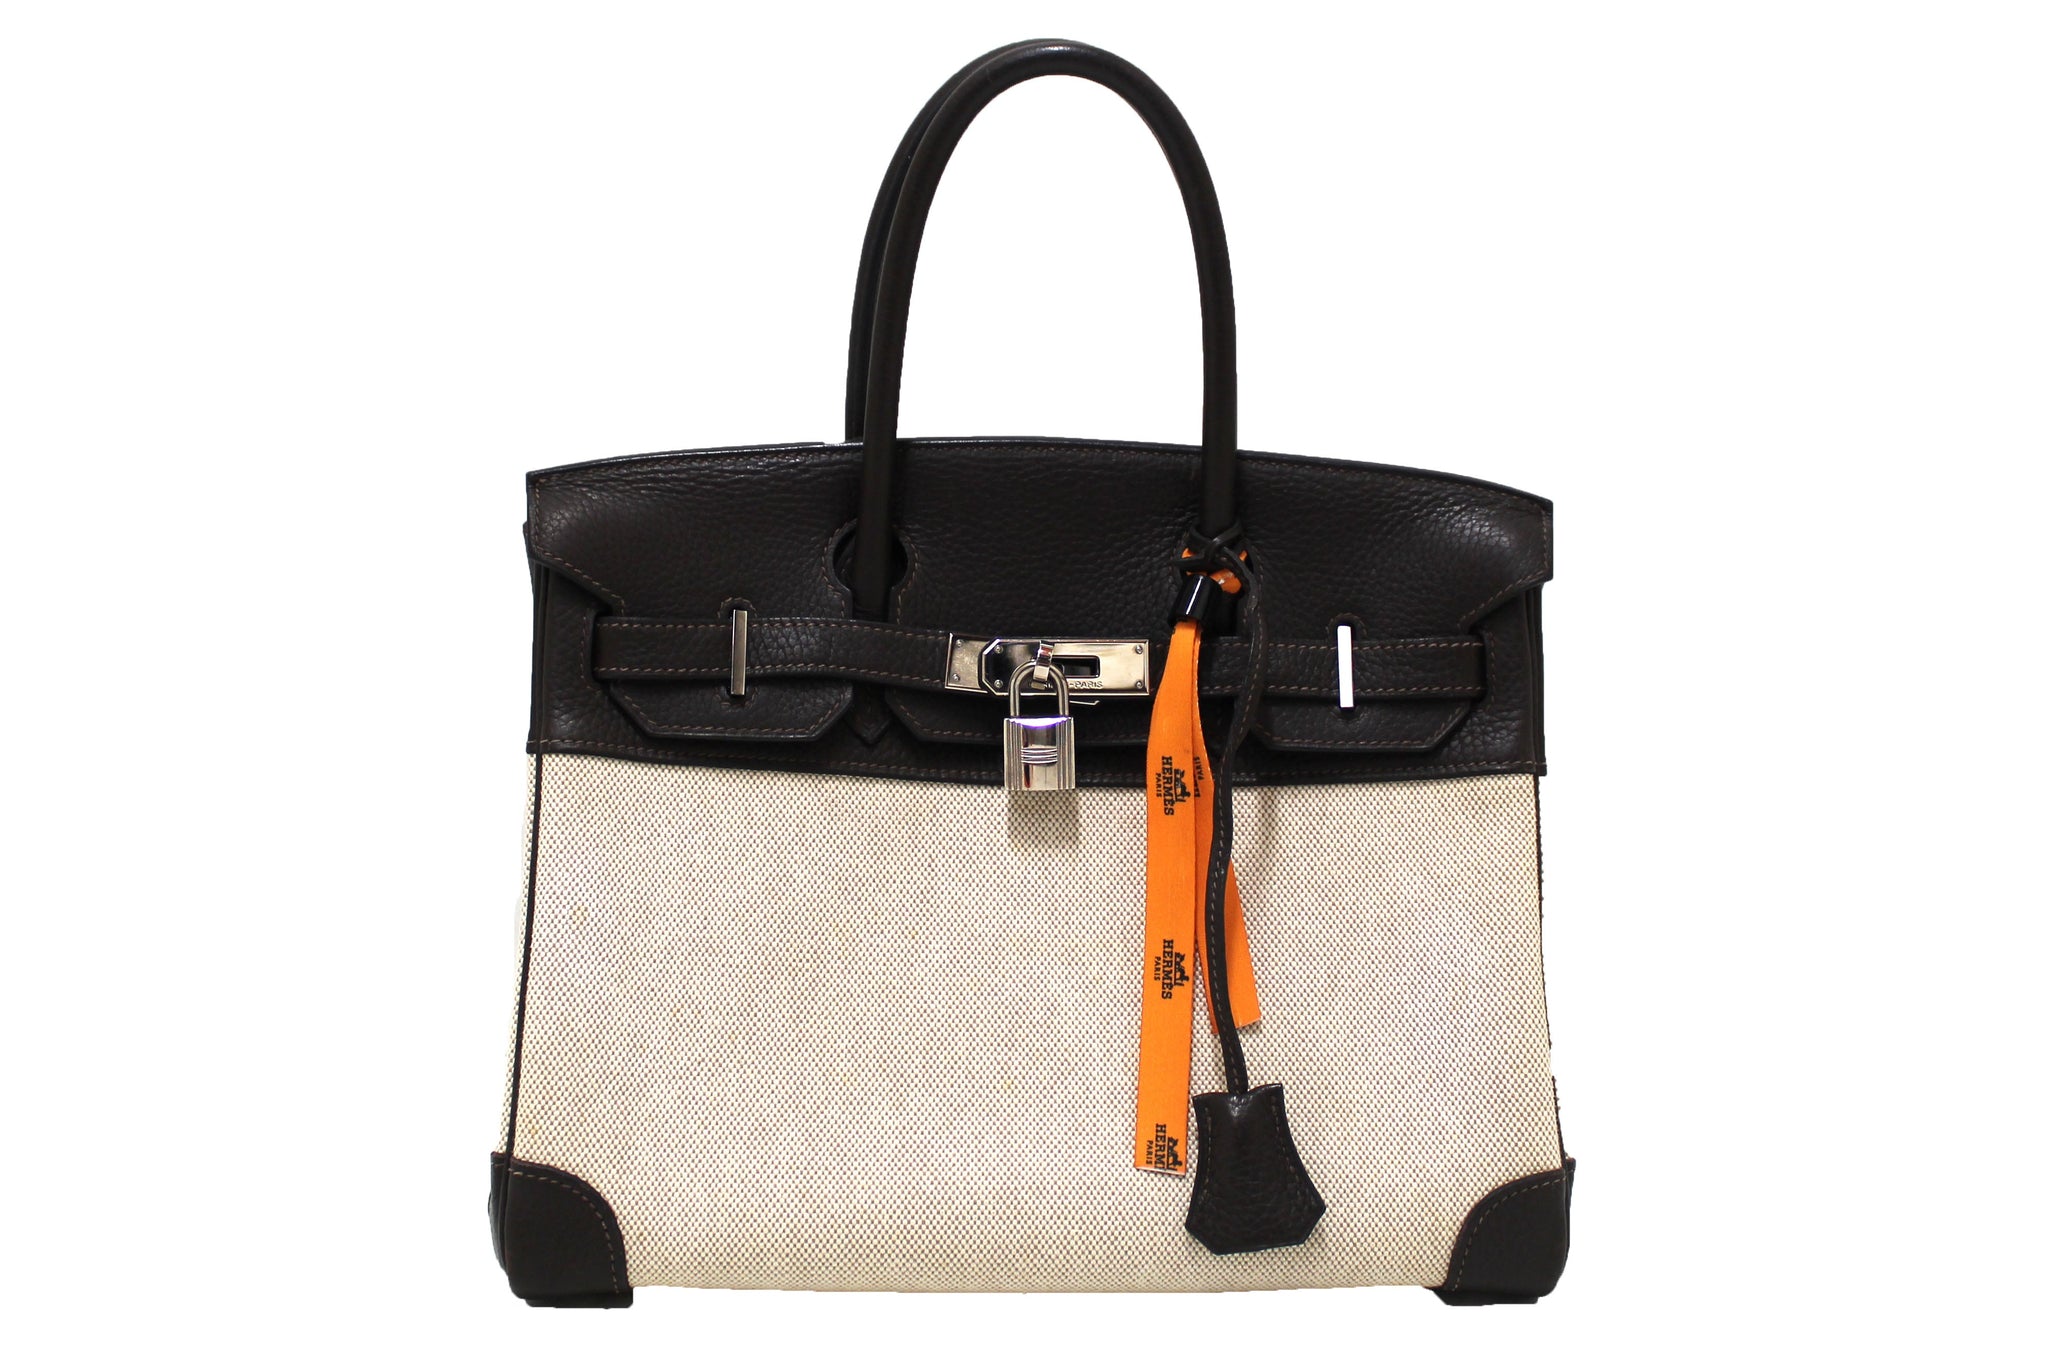 Hermes Brown Togo Leather and Toile Canvas Birkin 30 Bag